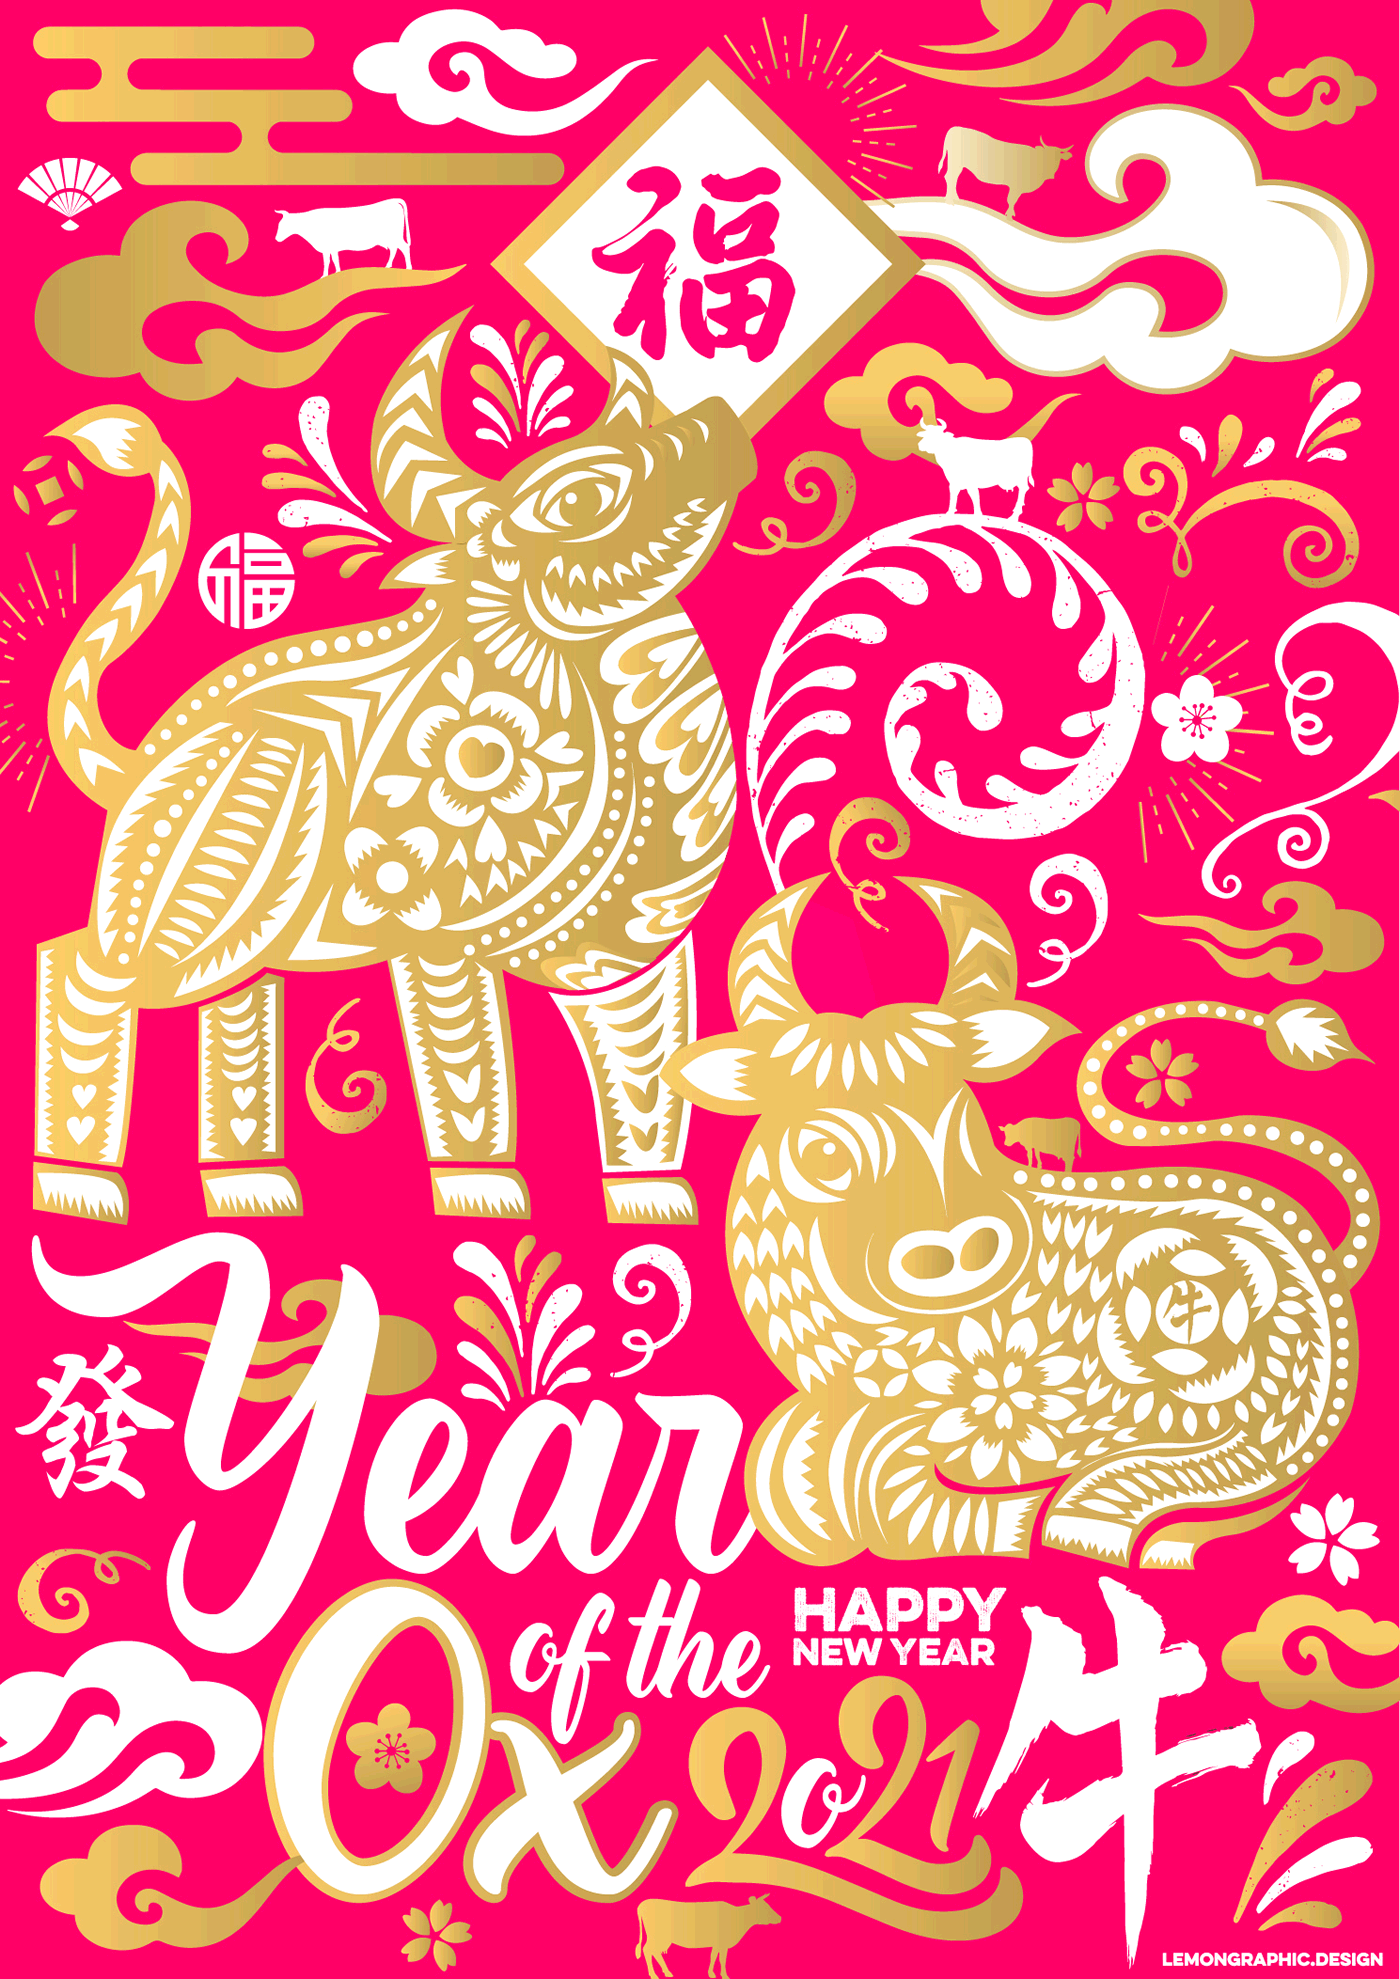 chinese new year 2021 chinese new year ox cny 2021 happy new year happy new year 2021 lunar new year 2021 ox design 2021 Year of the Ox